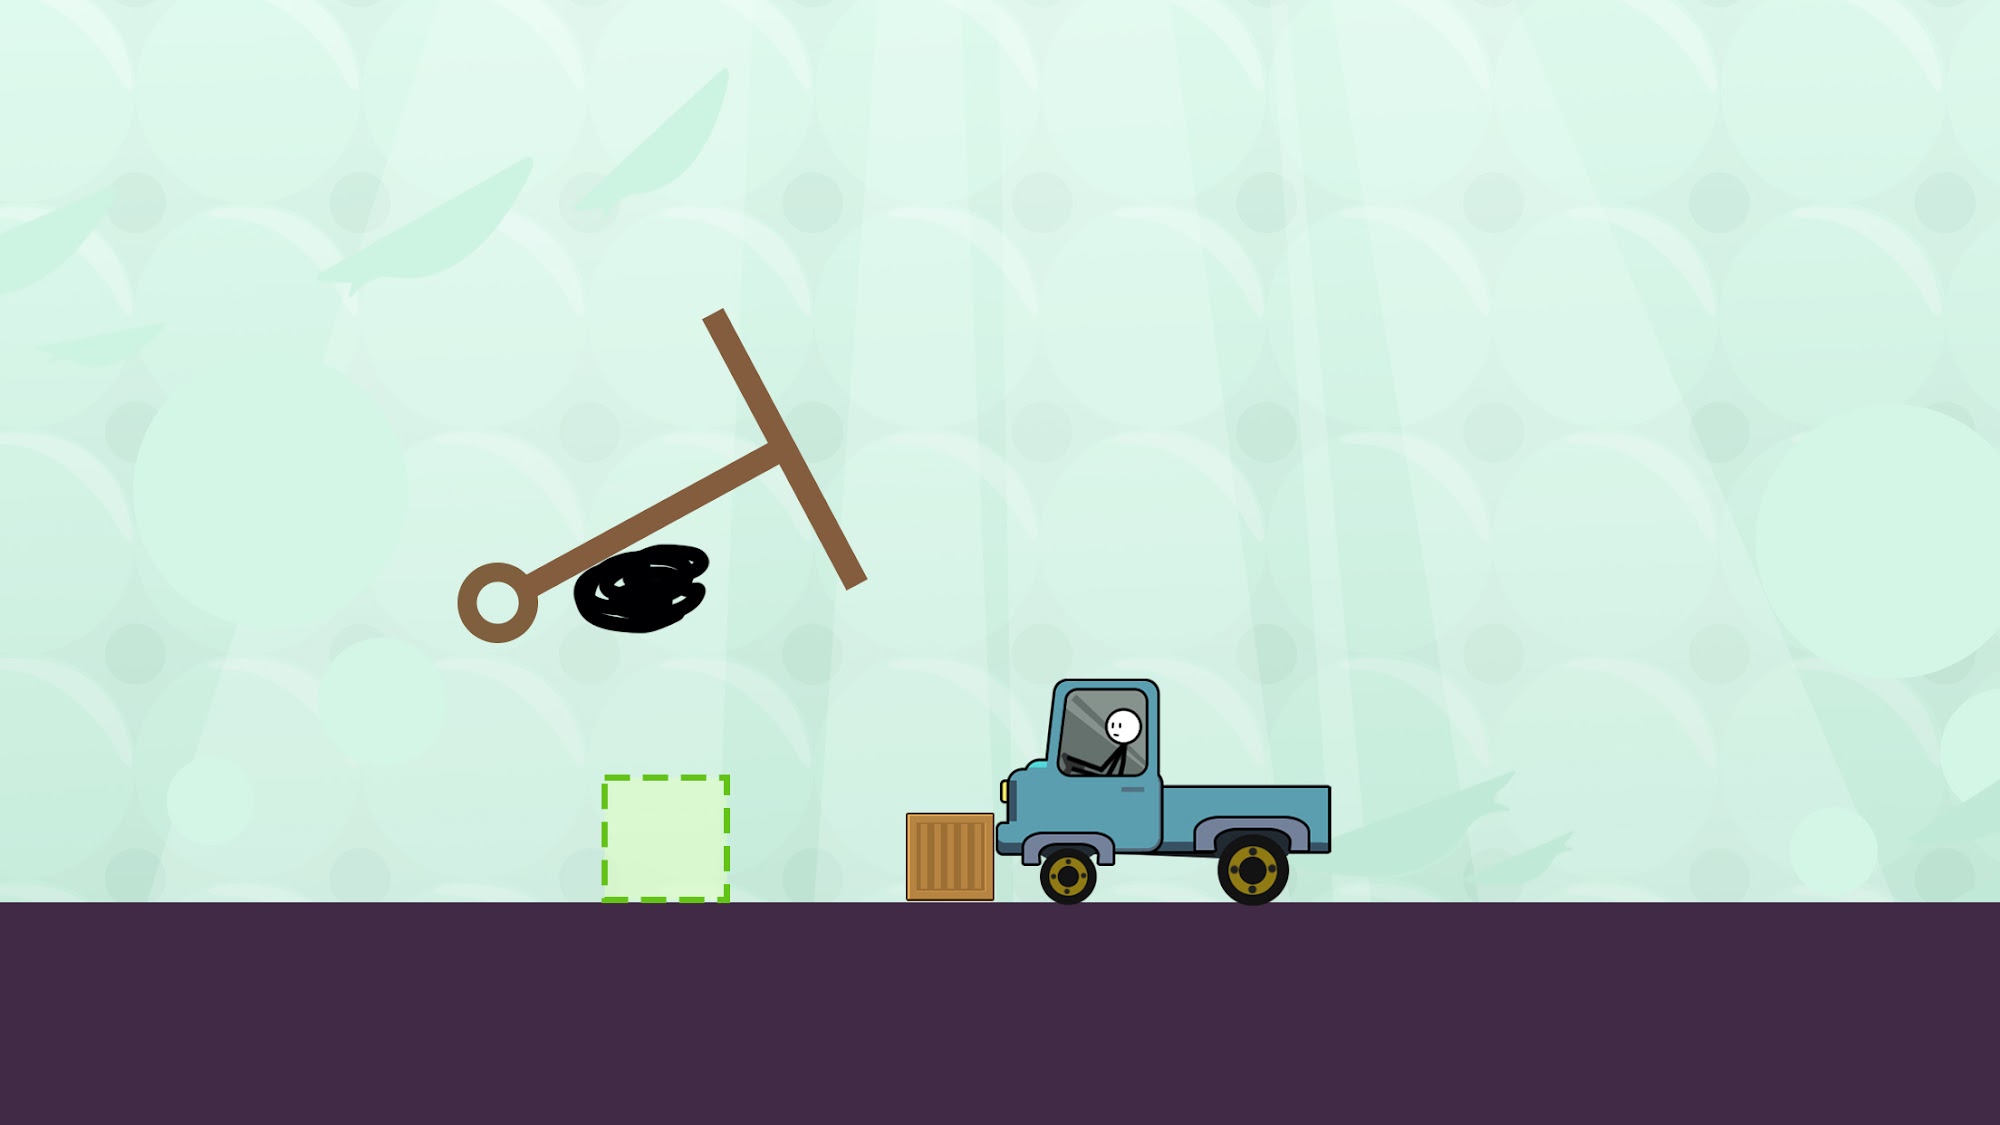 Download Stickman Physic Draw Puzzle Android free game.